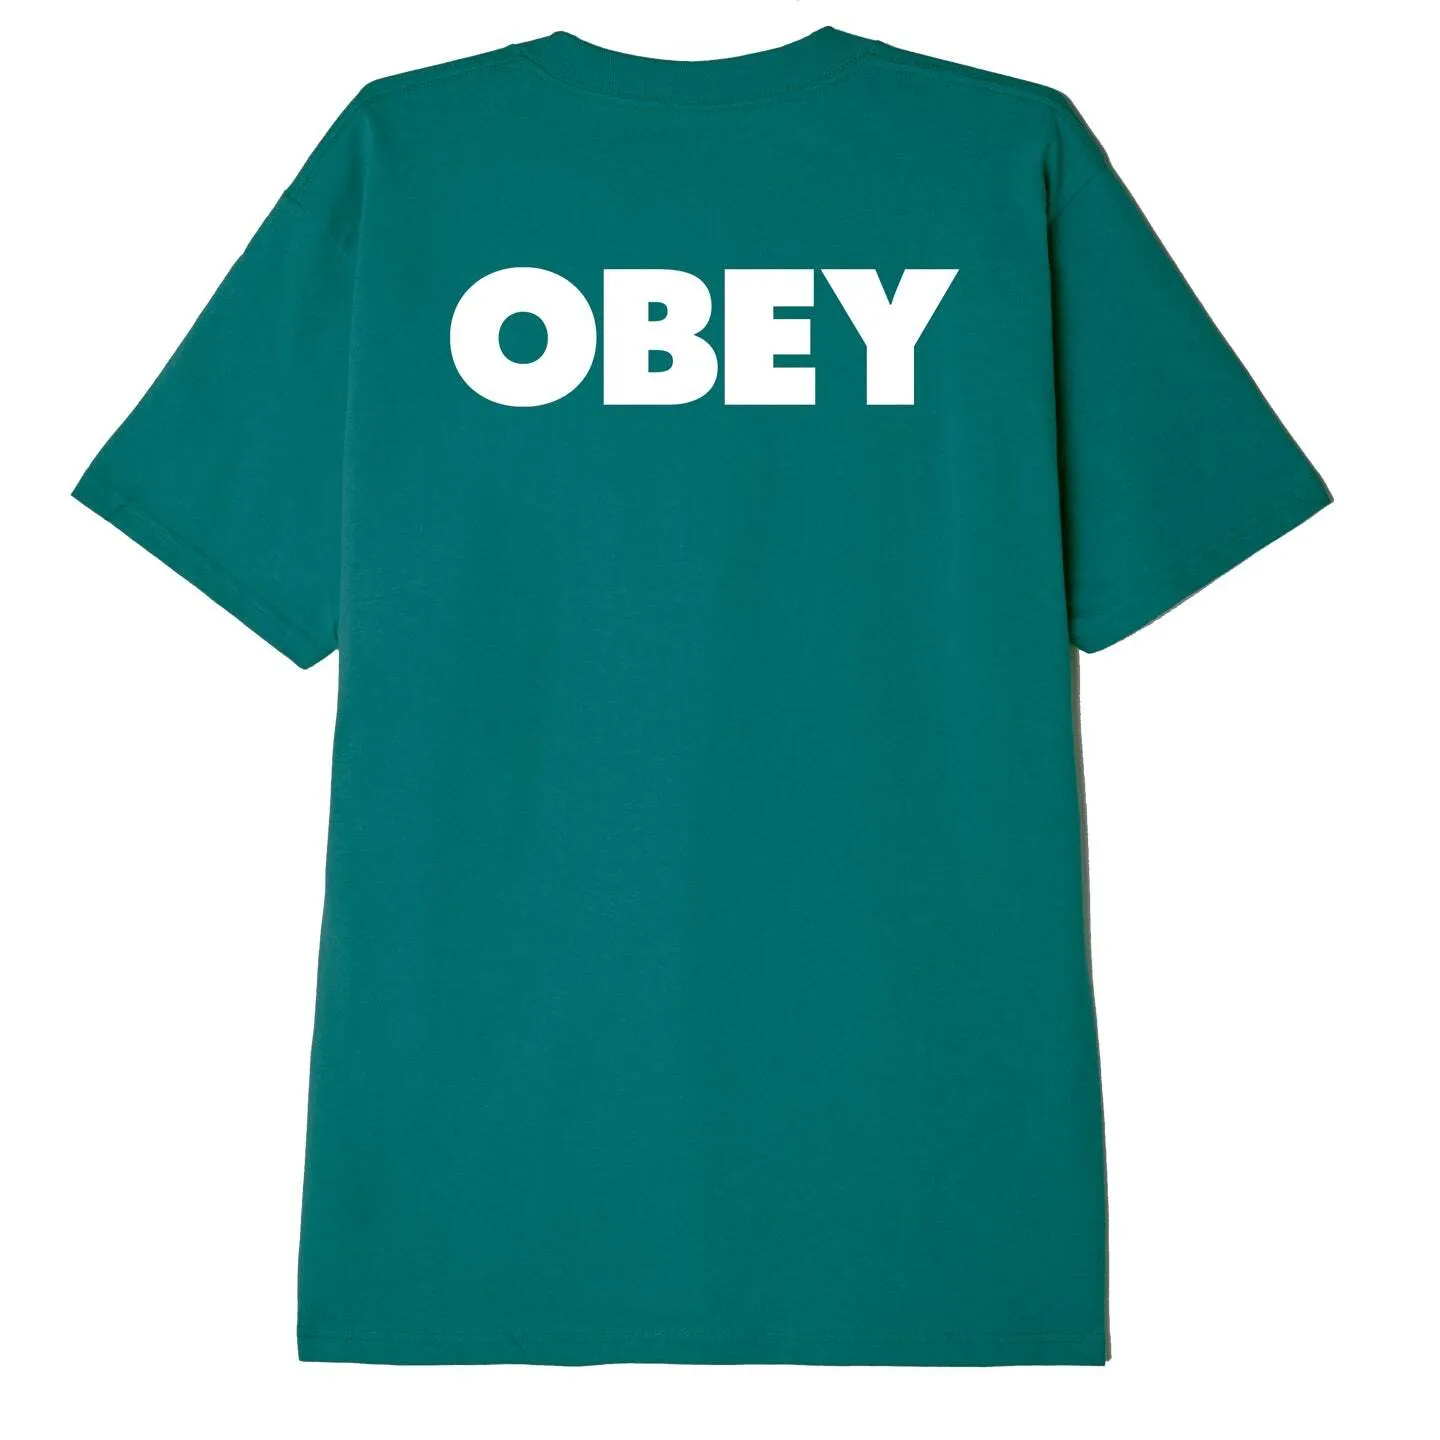 OBEY BOLD 2 CLASSIC T-SHIRT